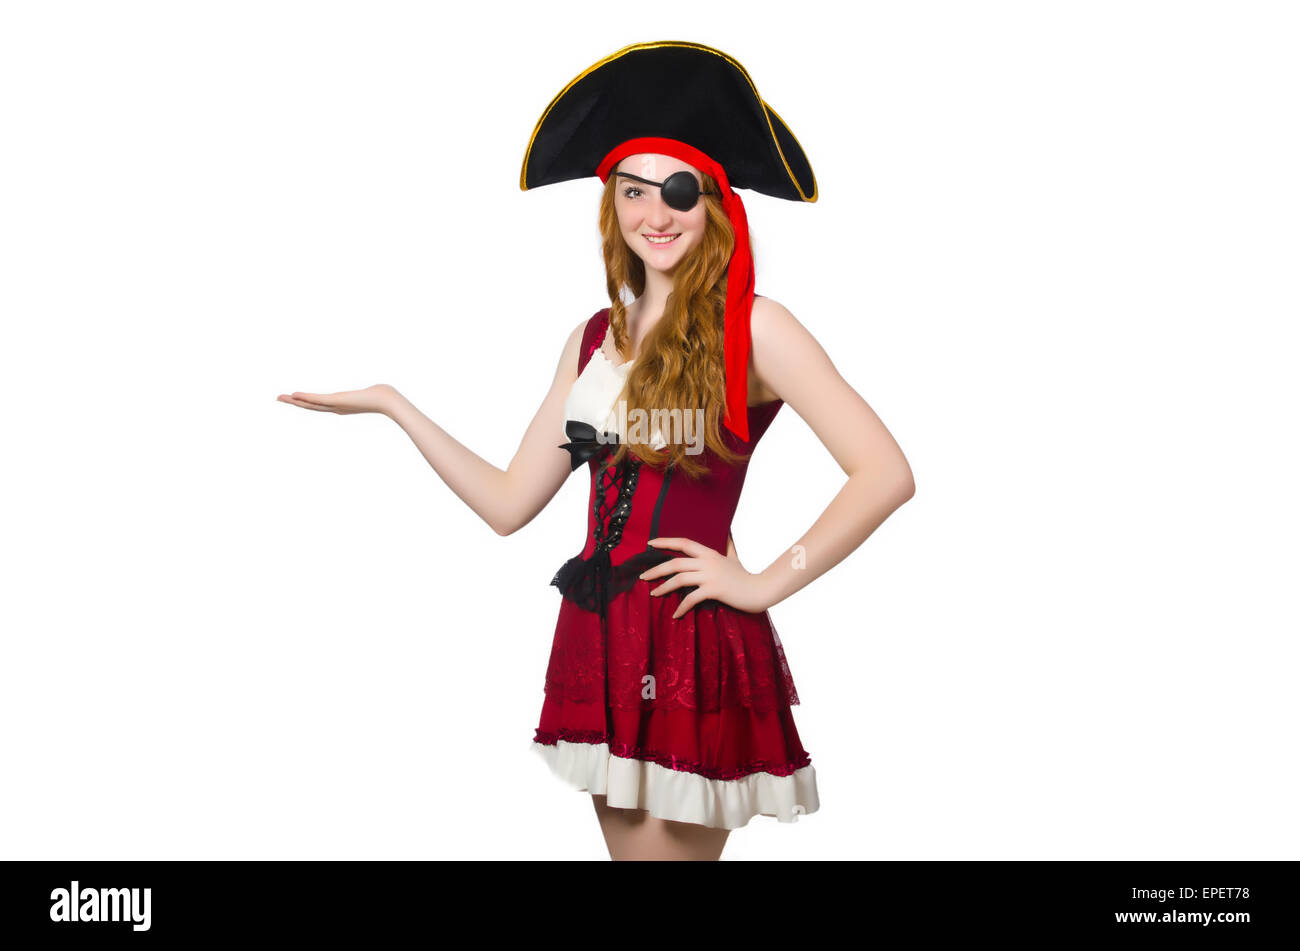 Femme pirate isolated on white Banque D'Images